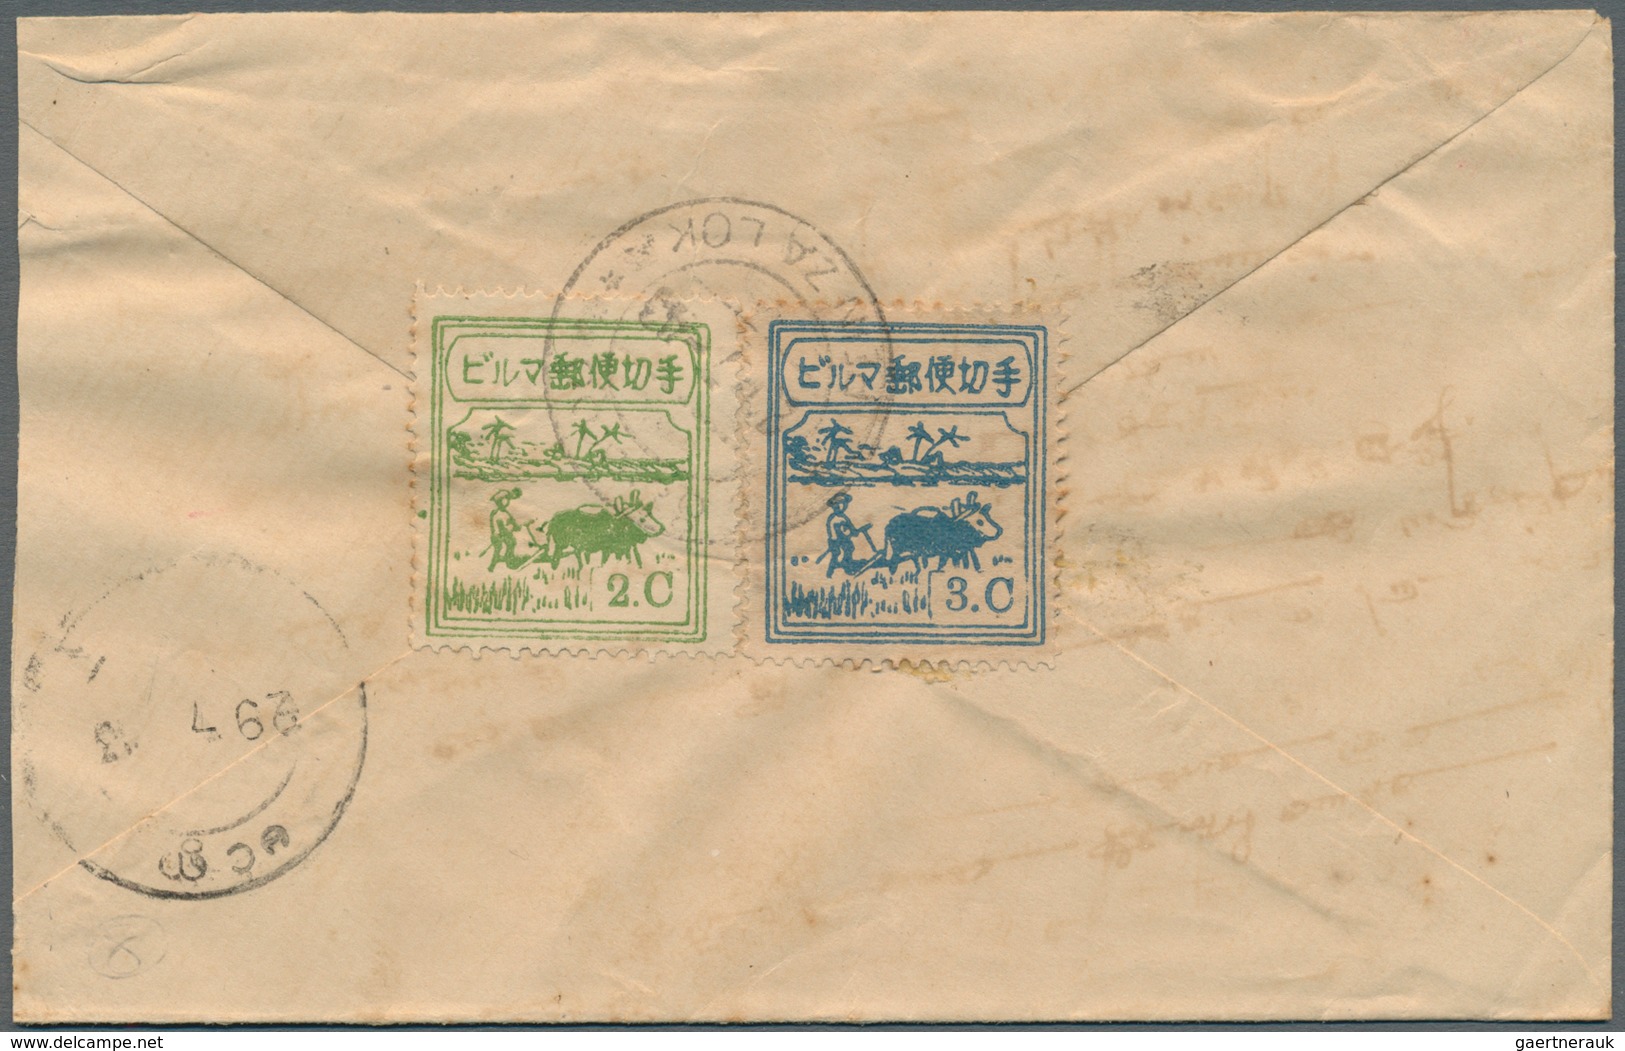 22909 Japan: 1902/1948: Very fine lot of 22 envelopes, picture postcards and postal stationeries including